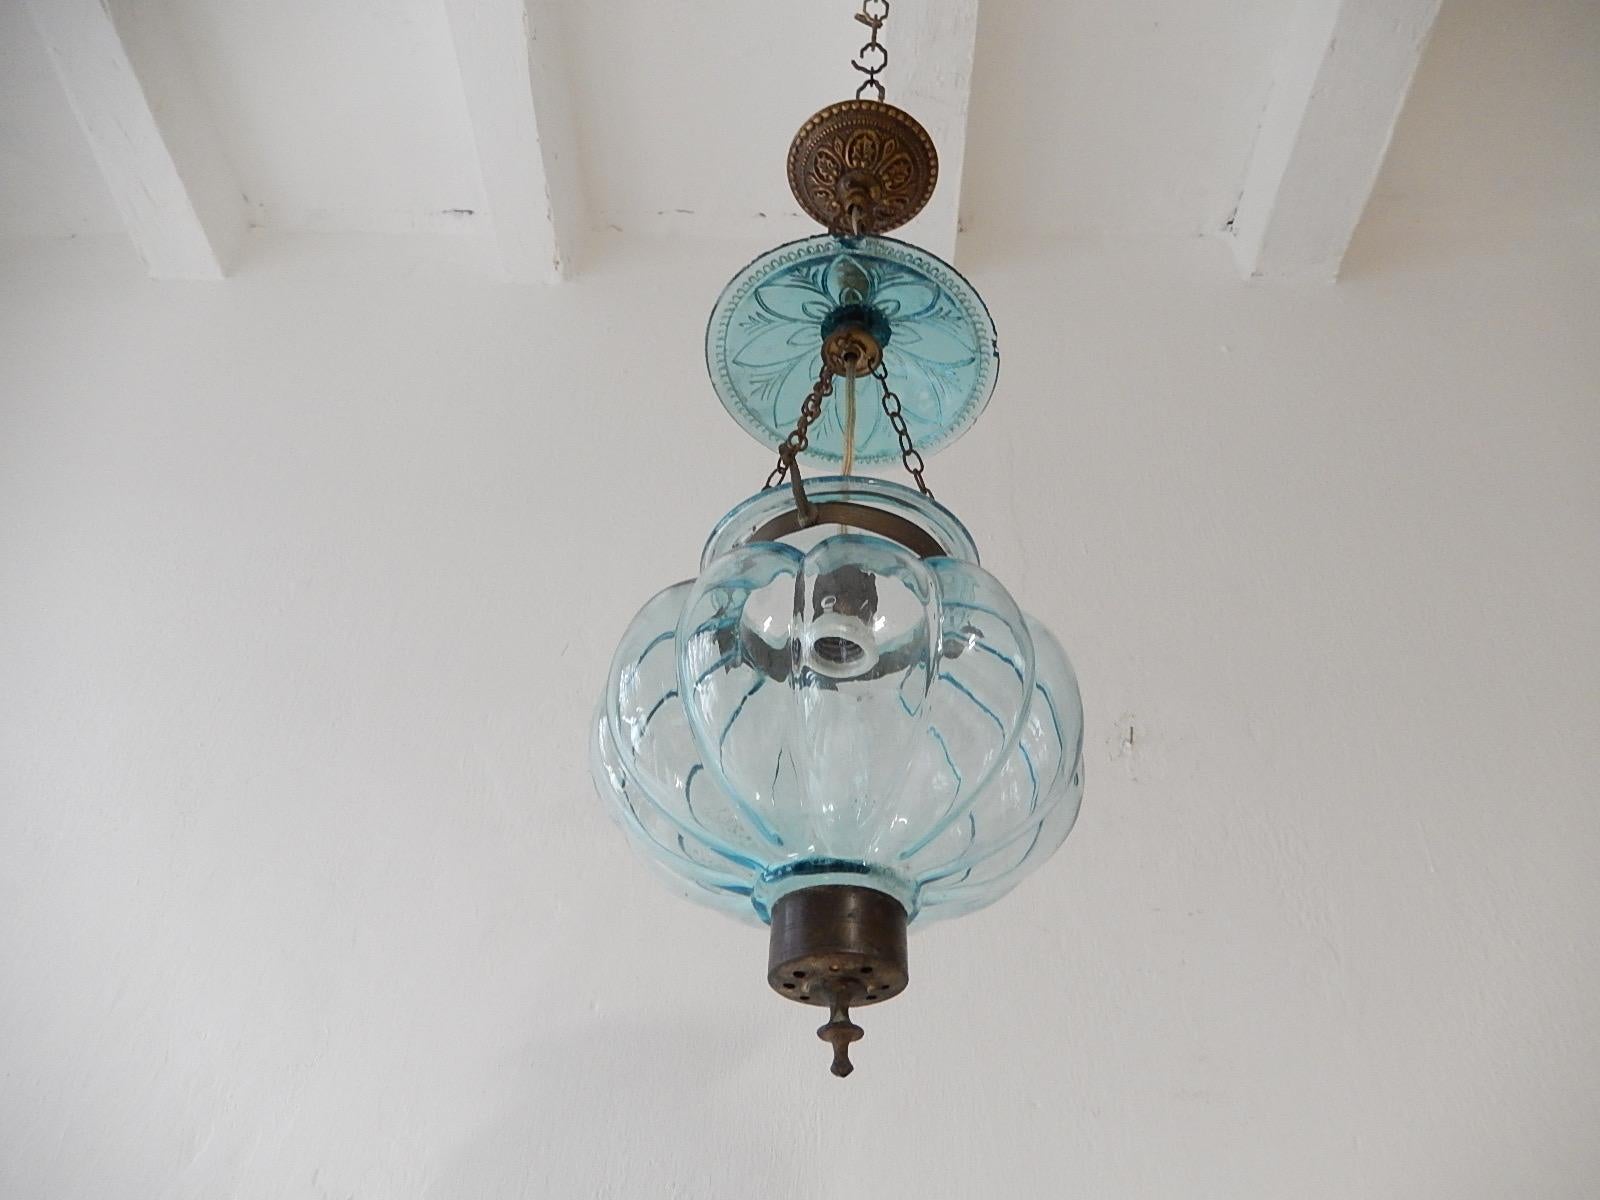 Petit lantern housing one-light. Rare aqua blue blown glass. Great craftsmanship. Re-wired and ready to hang with appropriate socket. Rare shape. Marked on side as shown in photo. Some scuff marks, but no cracks. Some small chips to lid. One bubble